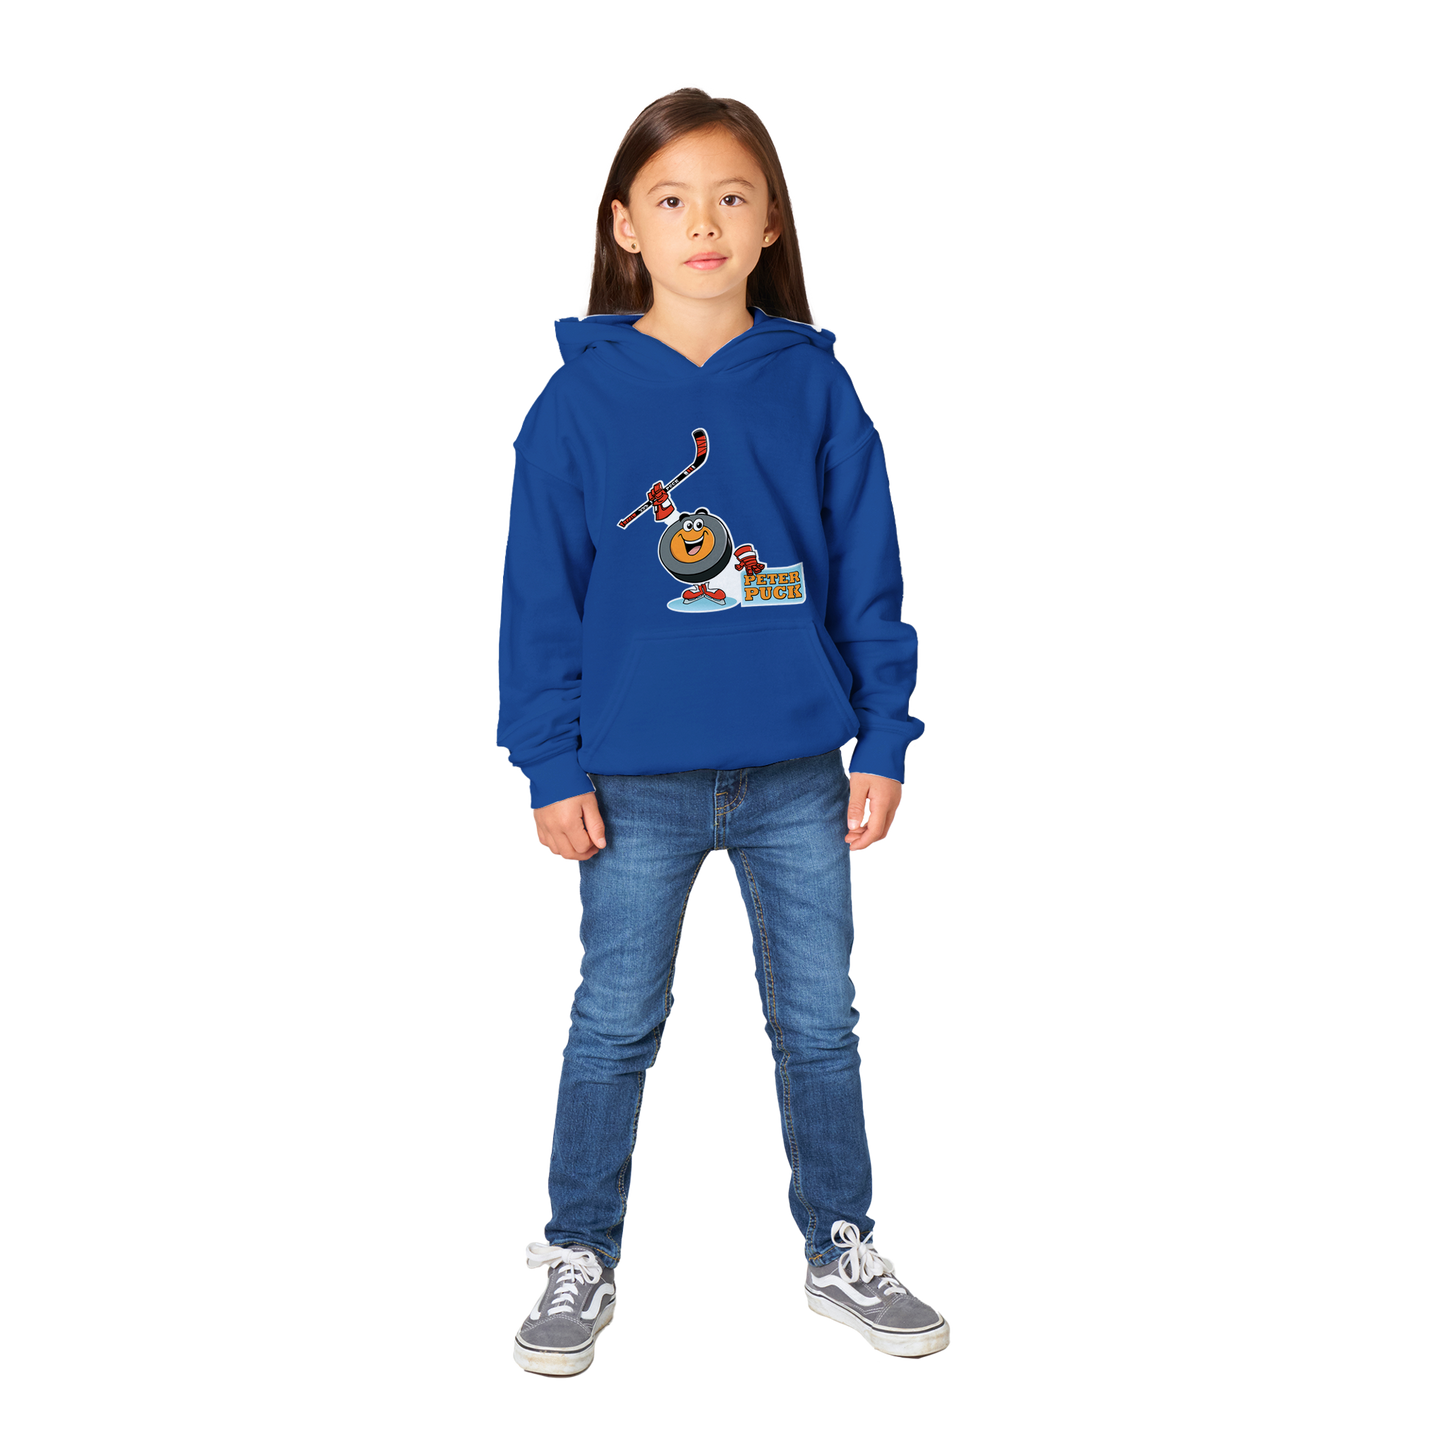 Peter Puck Celly Classic Kids Pullover Hoodie